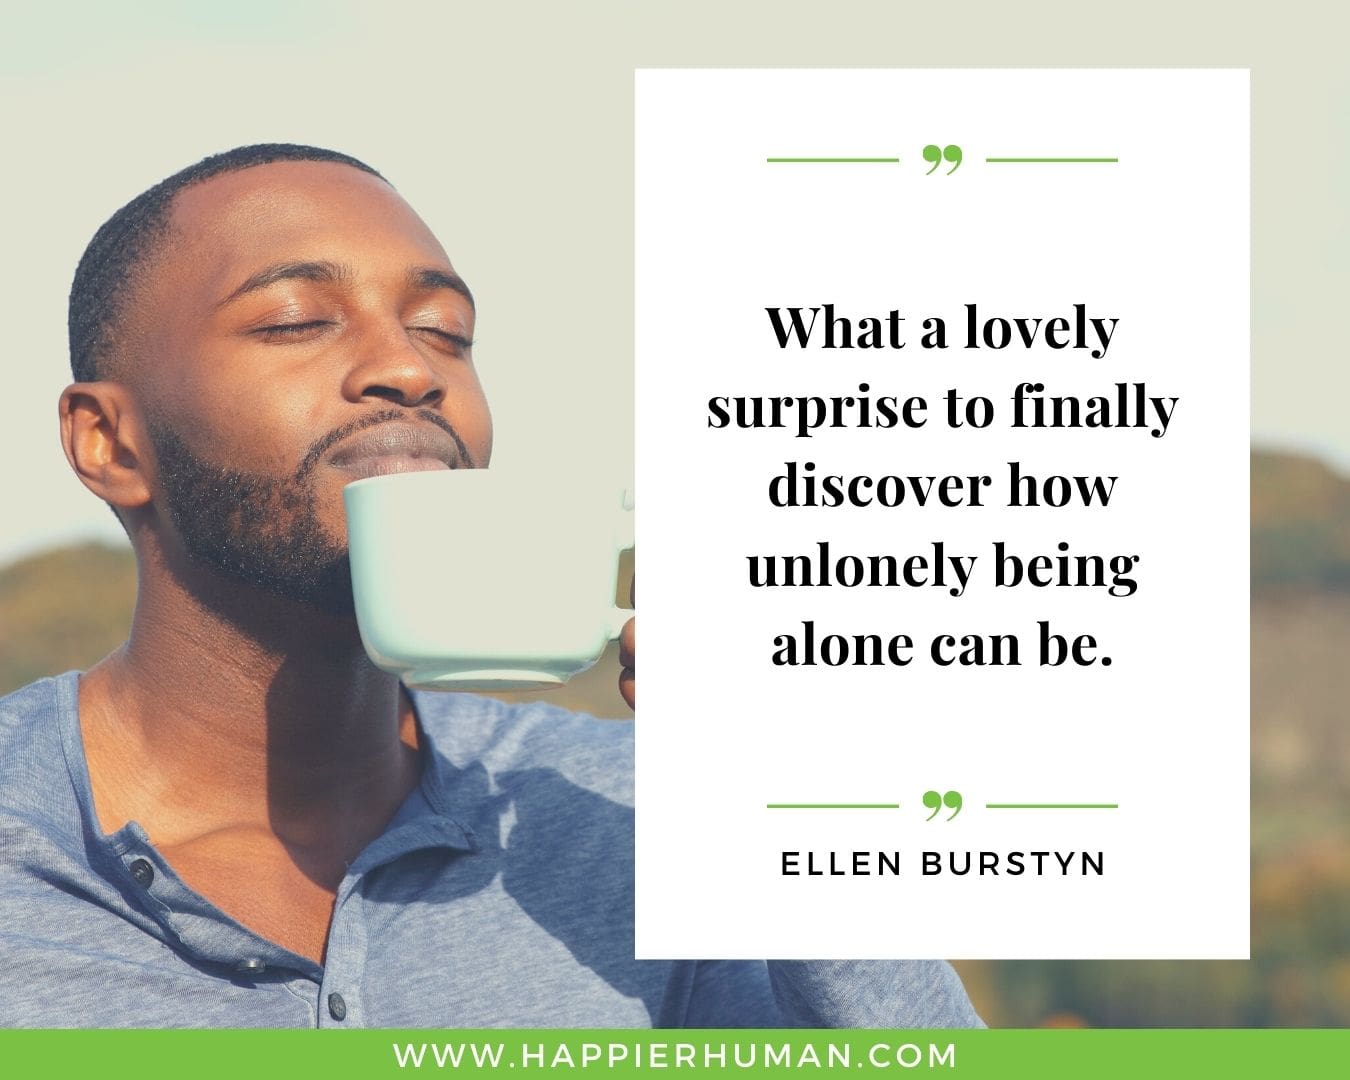 Loneliness Quotes - “What a lovely surprise to finally discover how unlonely being alone can be.” – Ellen Burstyn